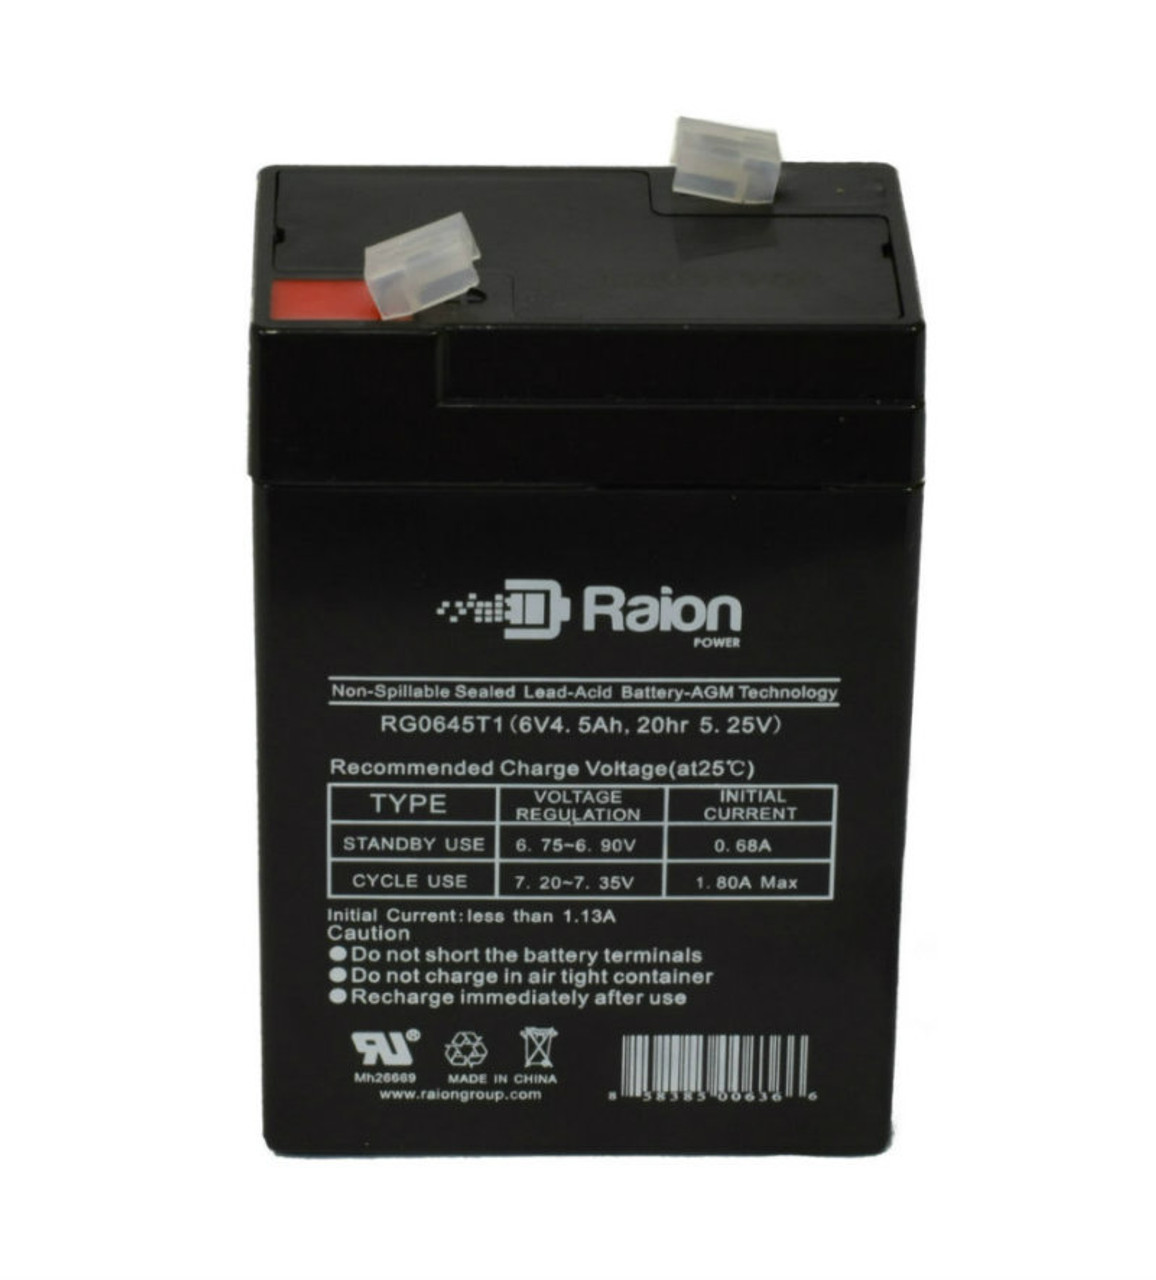 Raion Power RG0645T1 Replacement Battery Cartridge for Bently Laboratories Inc SM-0200